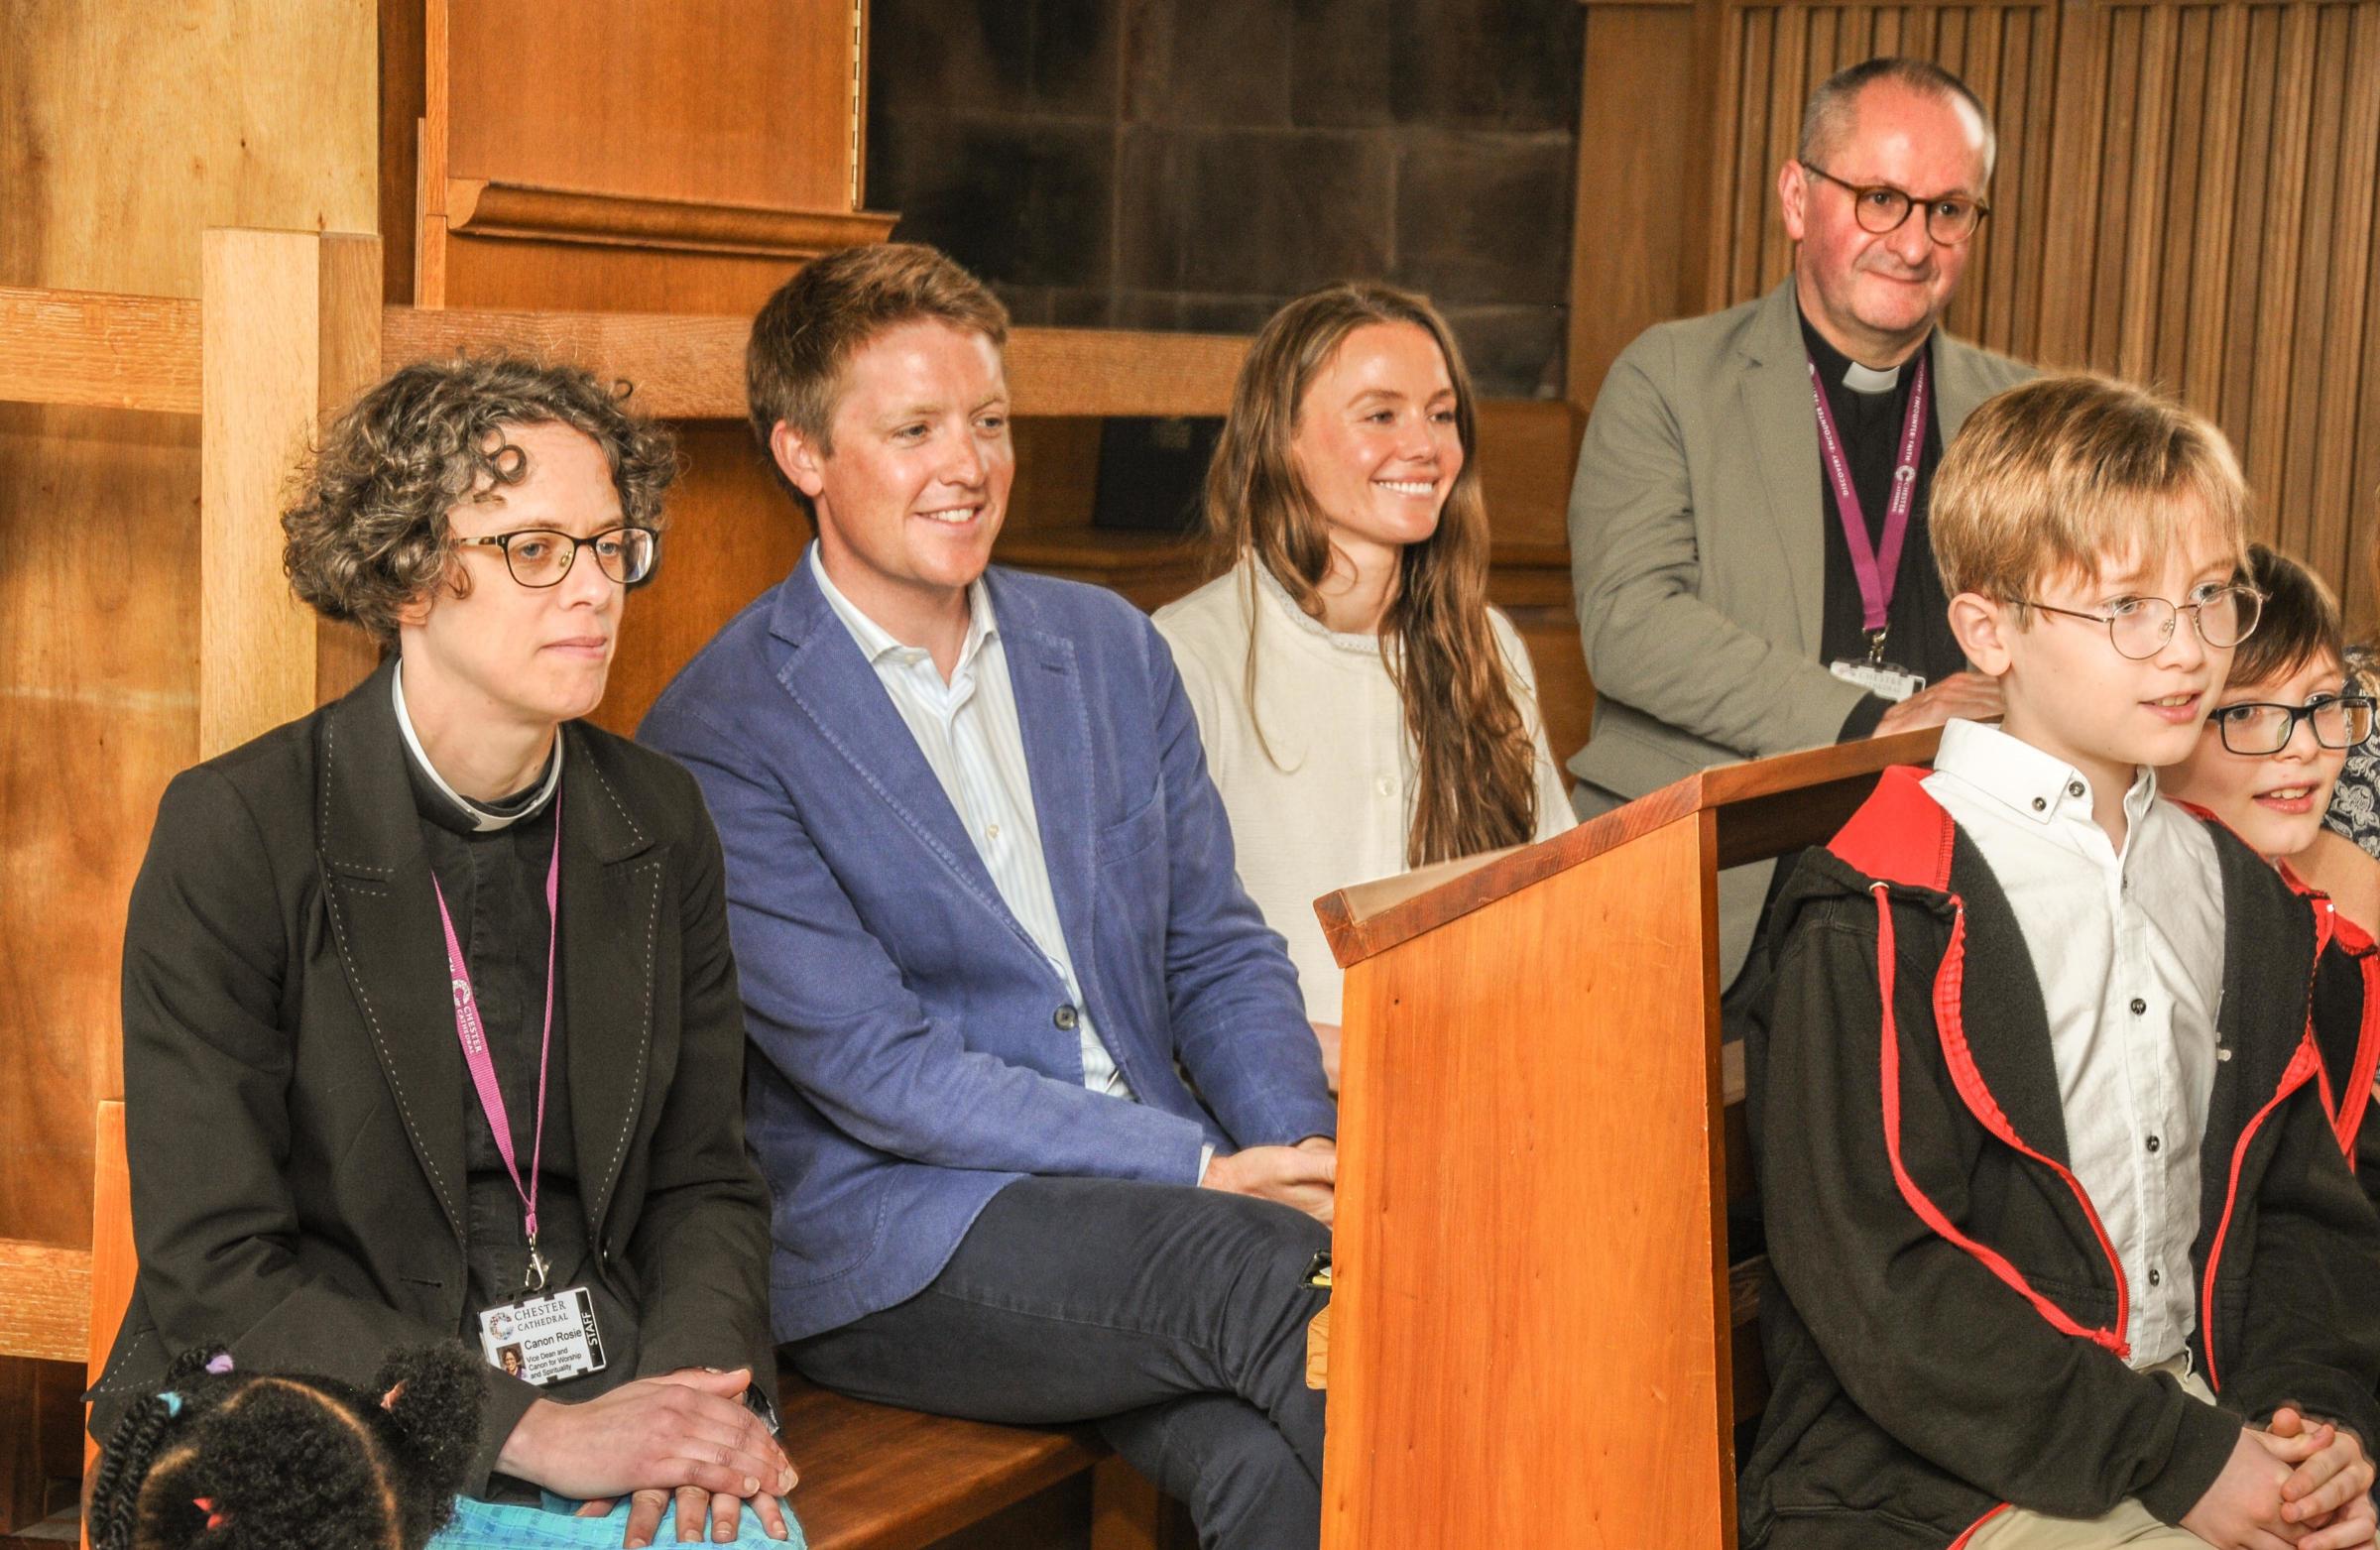 Looking on at the Small Sounds session are the Duke of Westminster, Olivia Henson, Revd Canon Rosie Woodall and the Very Revd Dr Tim Stratford. Photo: Simon Warburton.